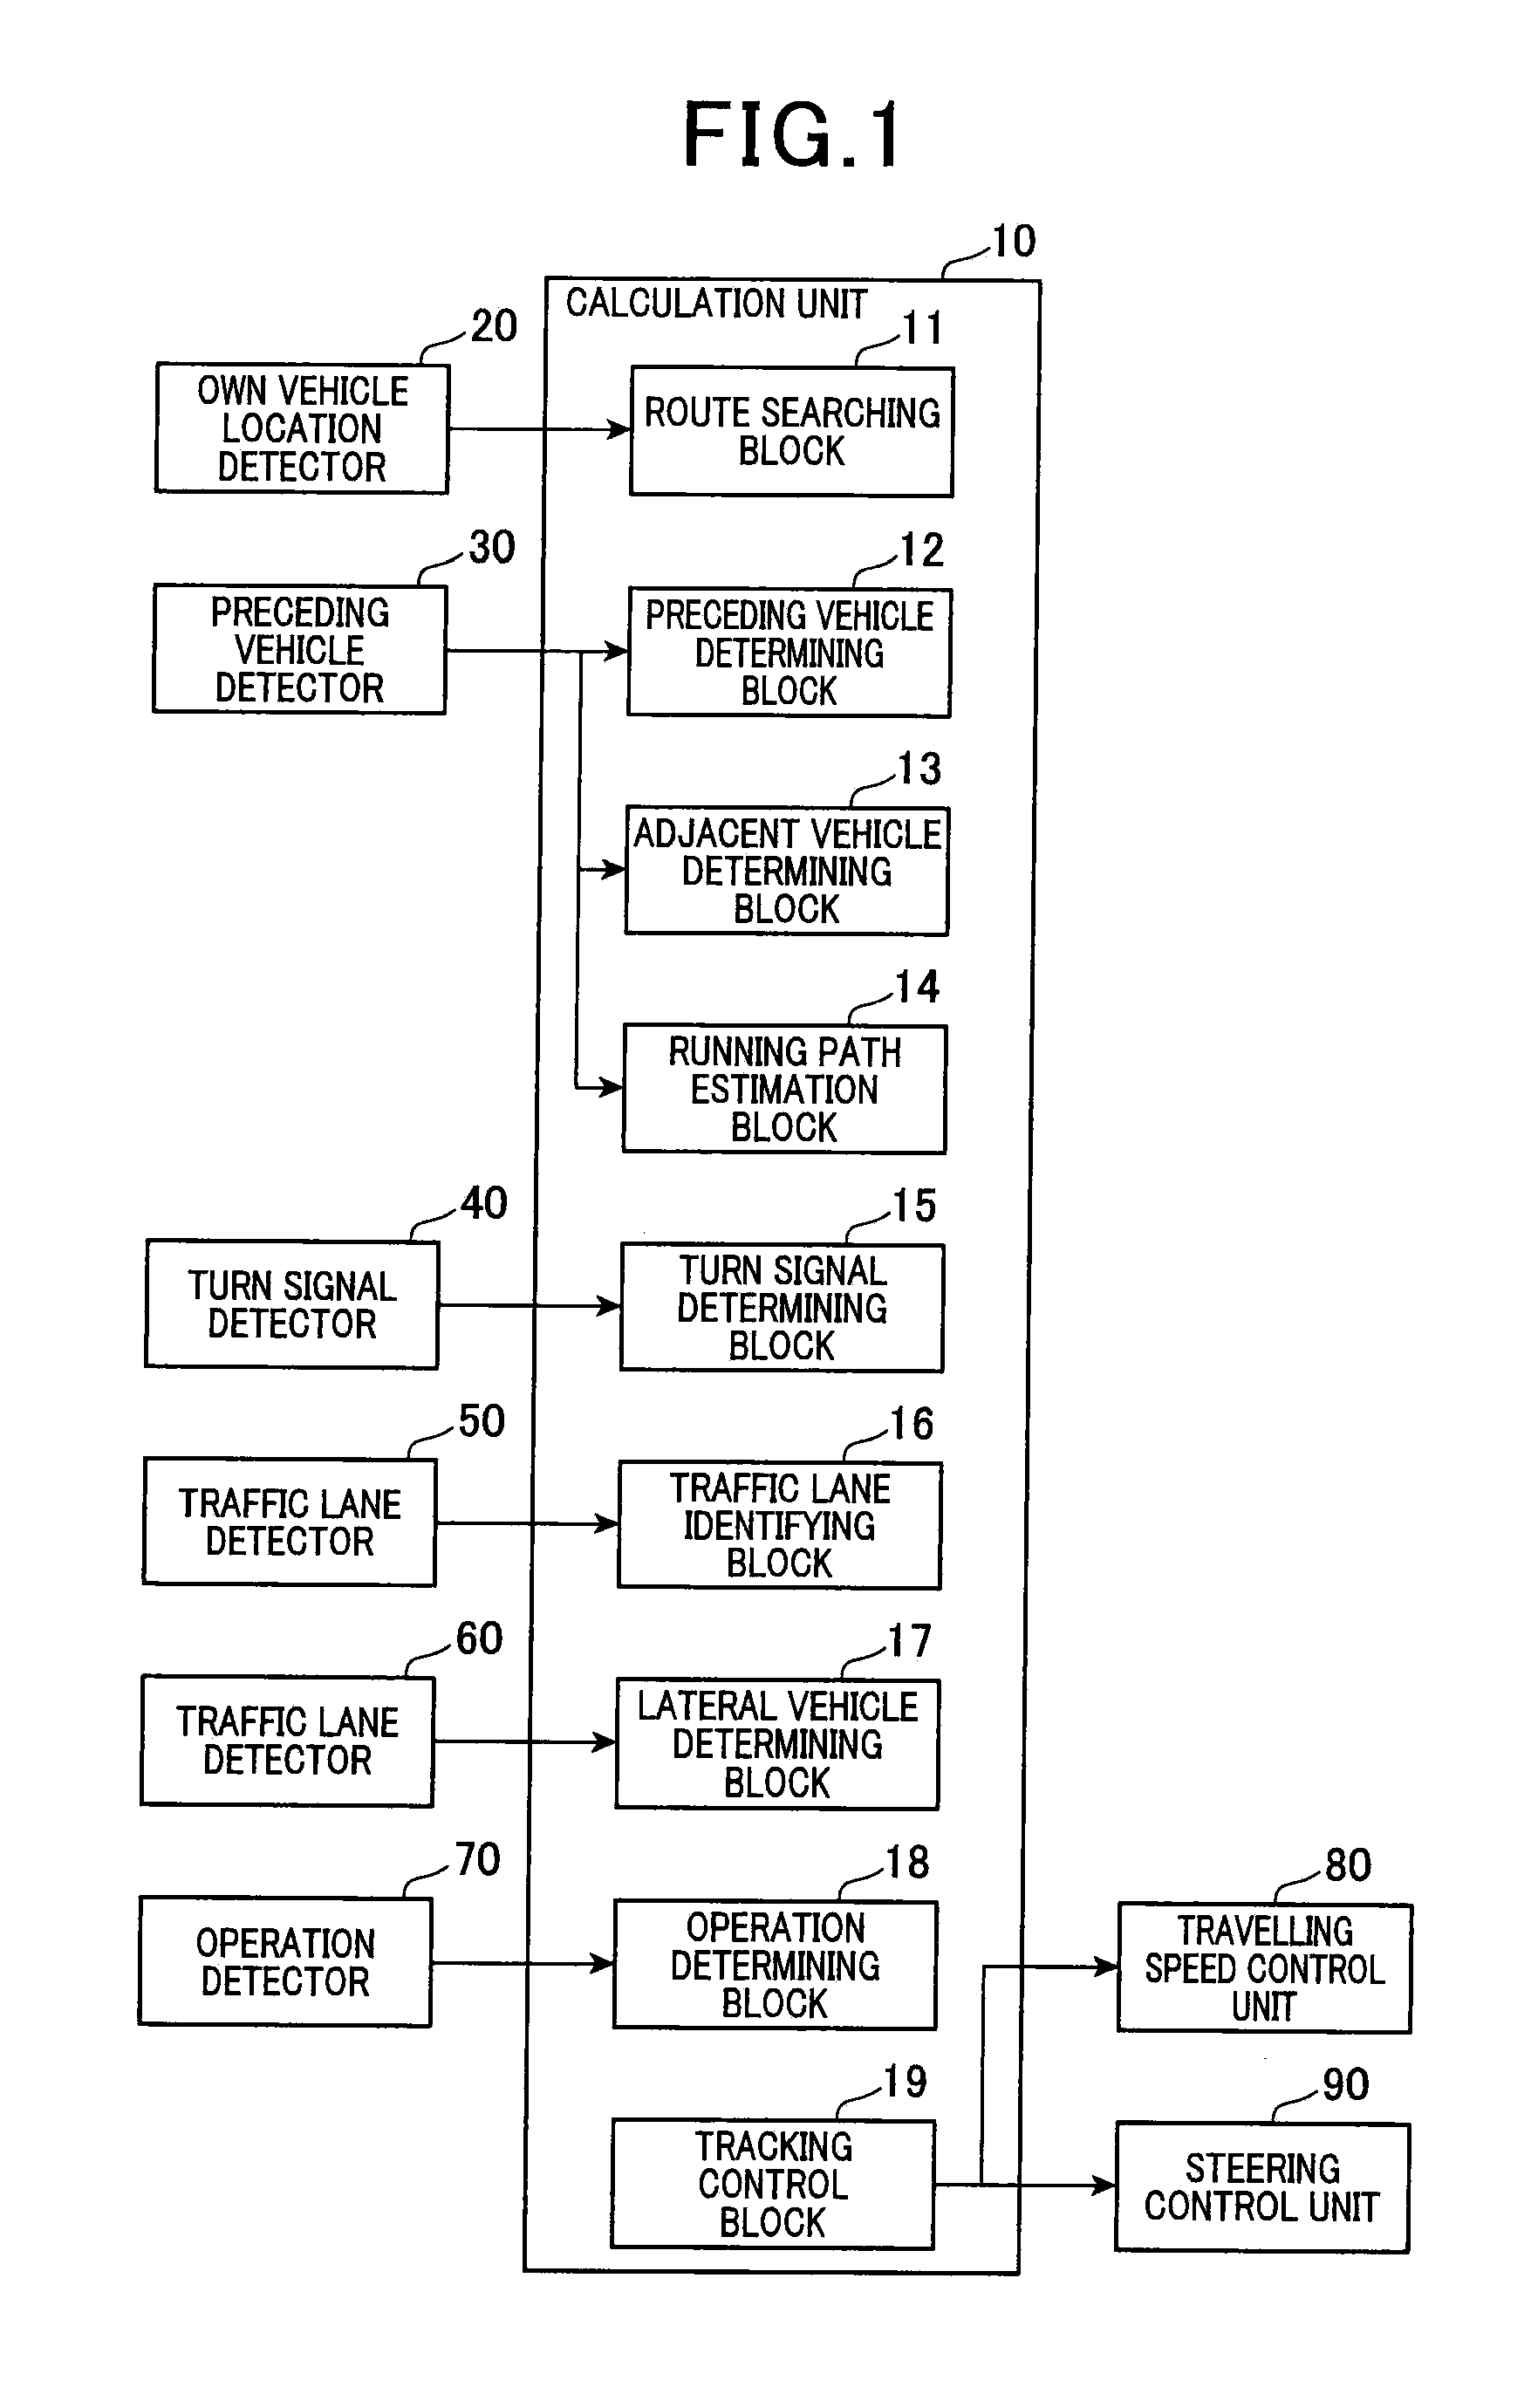 On-vehicle tracking control apparatus